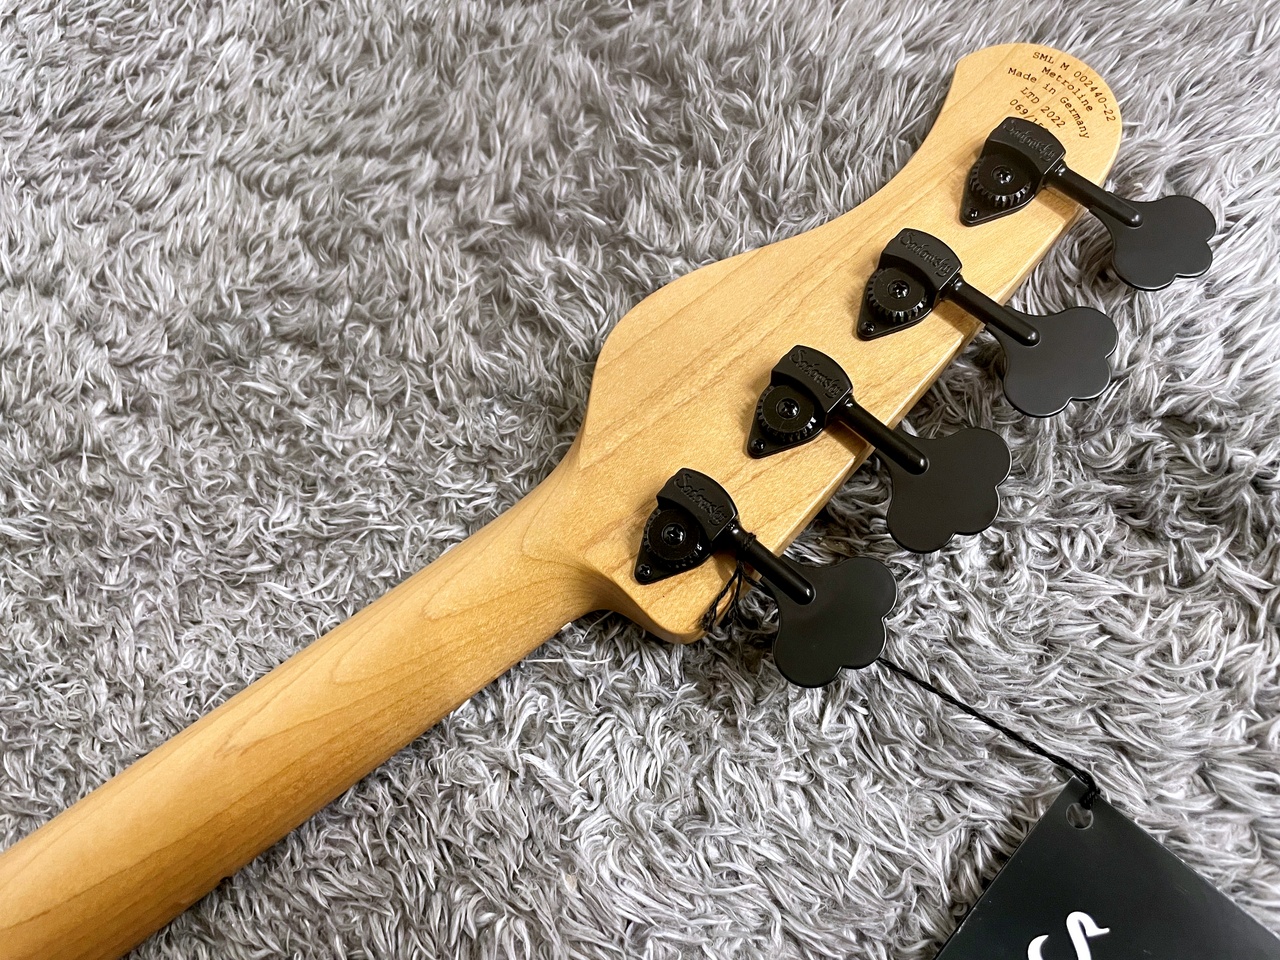 Sadowsky MetroLine 2022 Limited Edition 21-Fret MM 4-String【限定モデル】【Made in Germany】